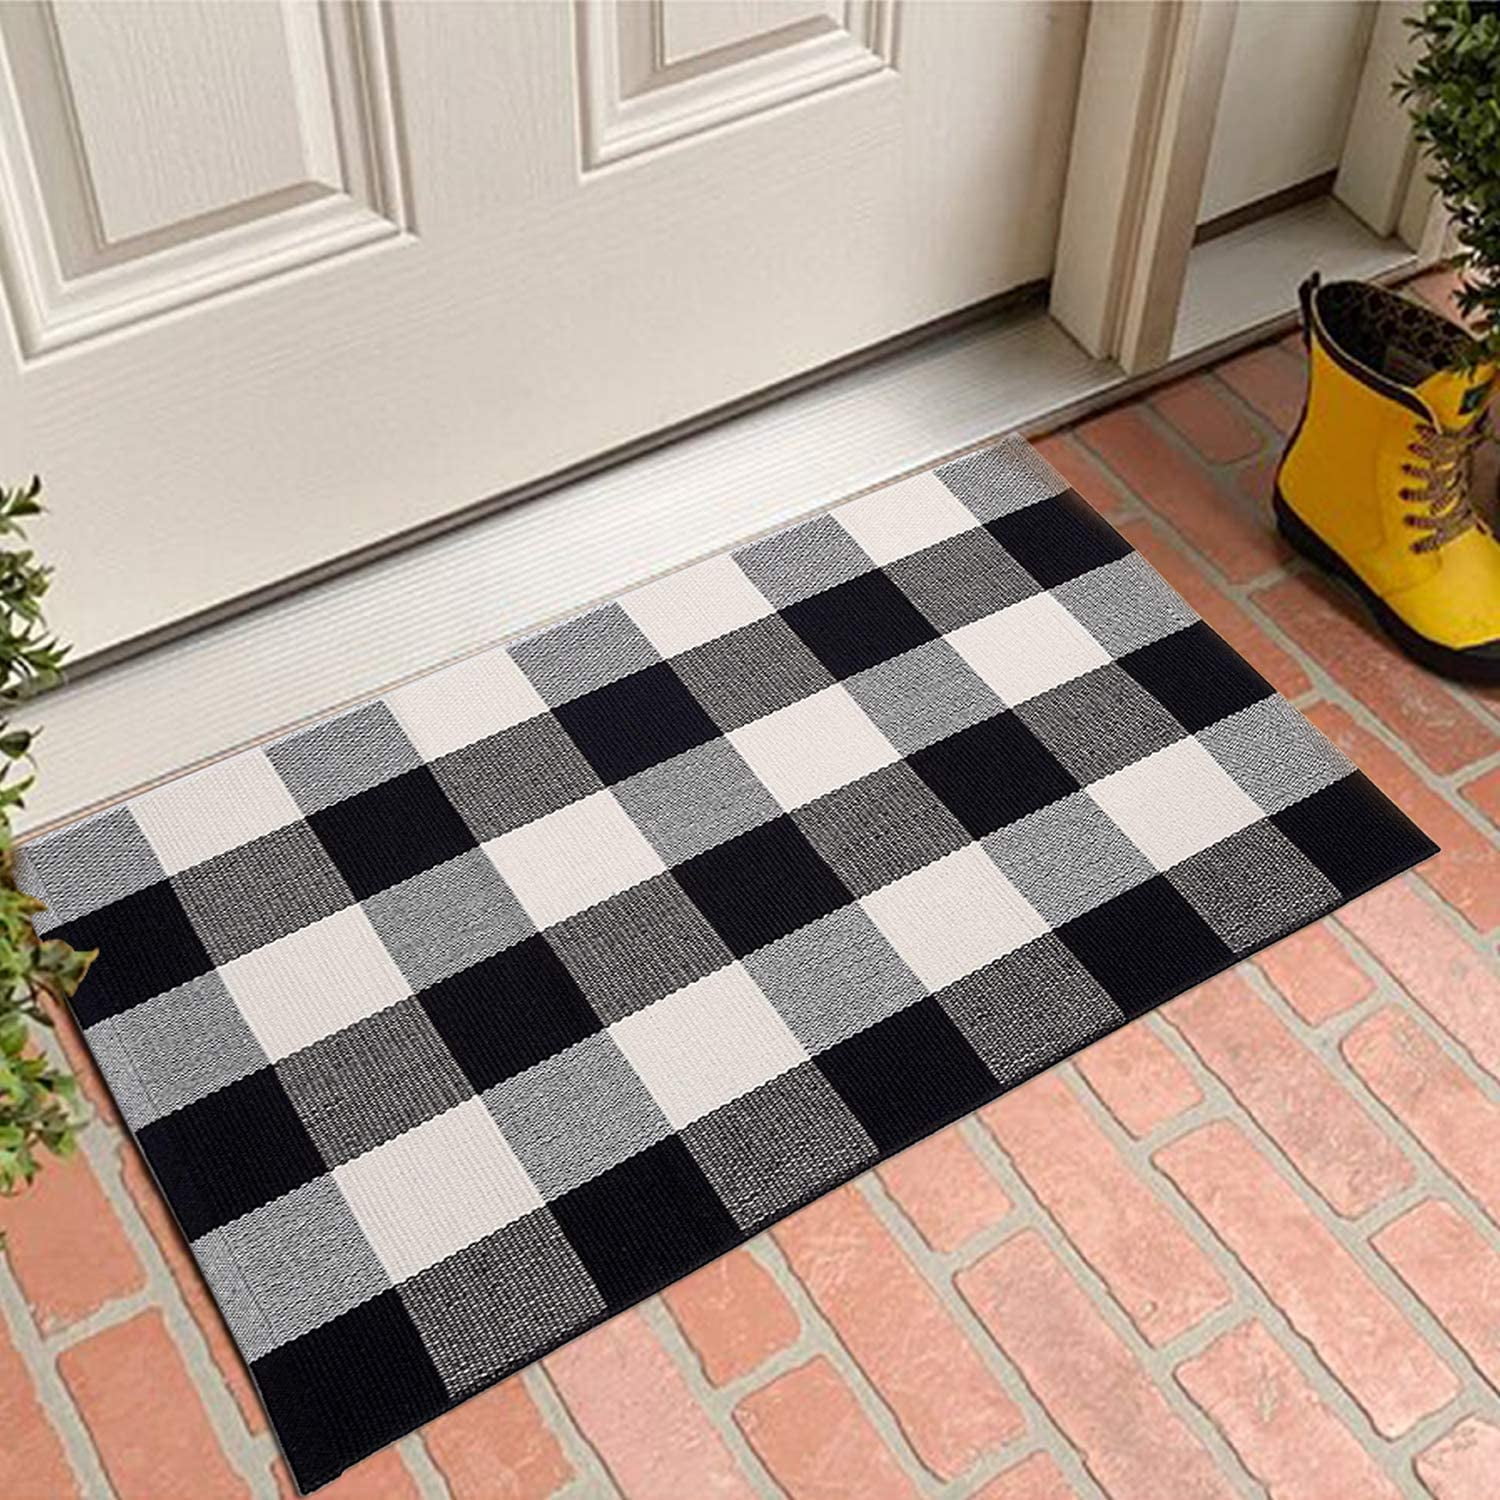 Collive Black and White Outdoor Rug 3'x 5',Washable Striped Front Porch  Decor Rug,Cotton Hand-Woven Farmhouse Welcome Layered Door Mats Outdoor